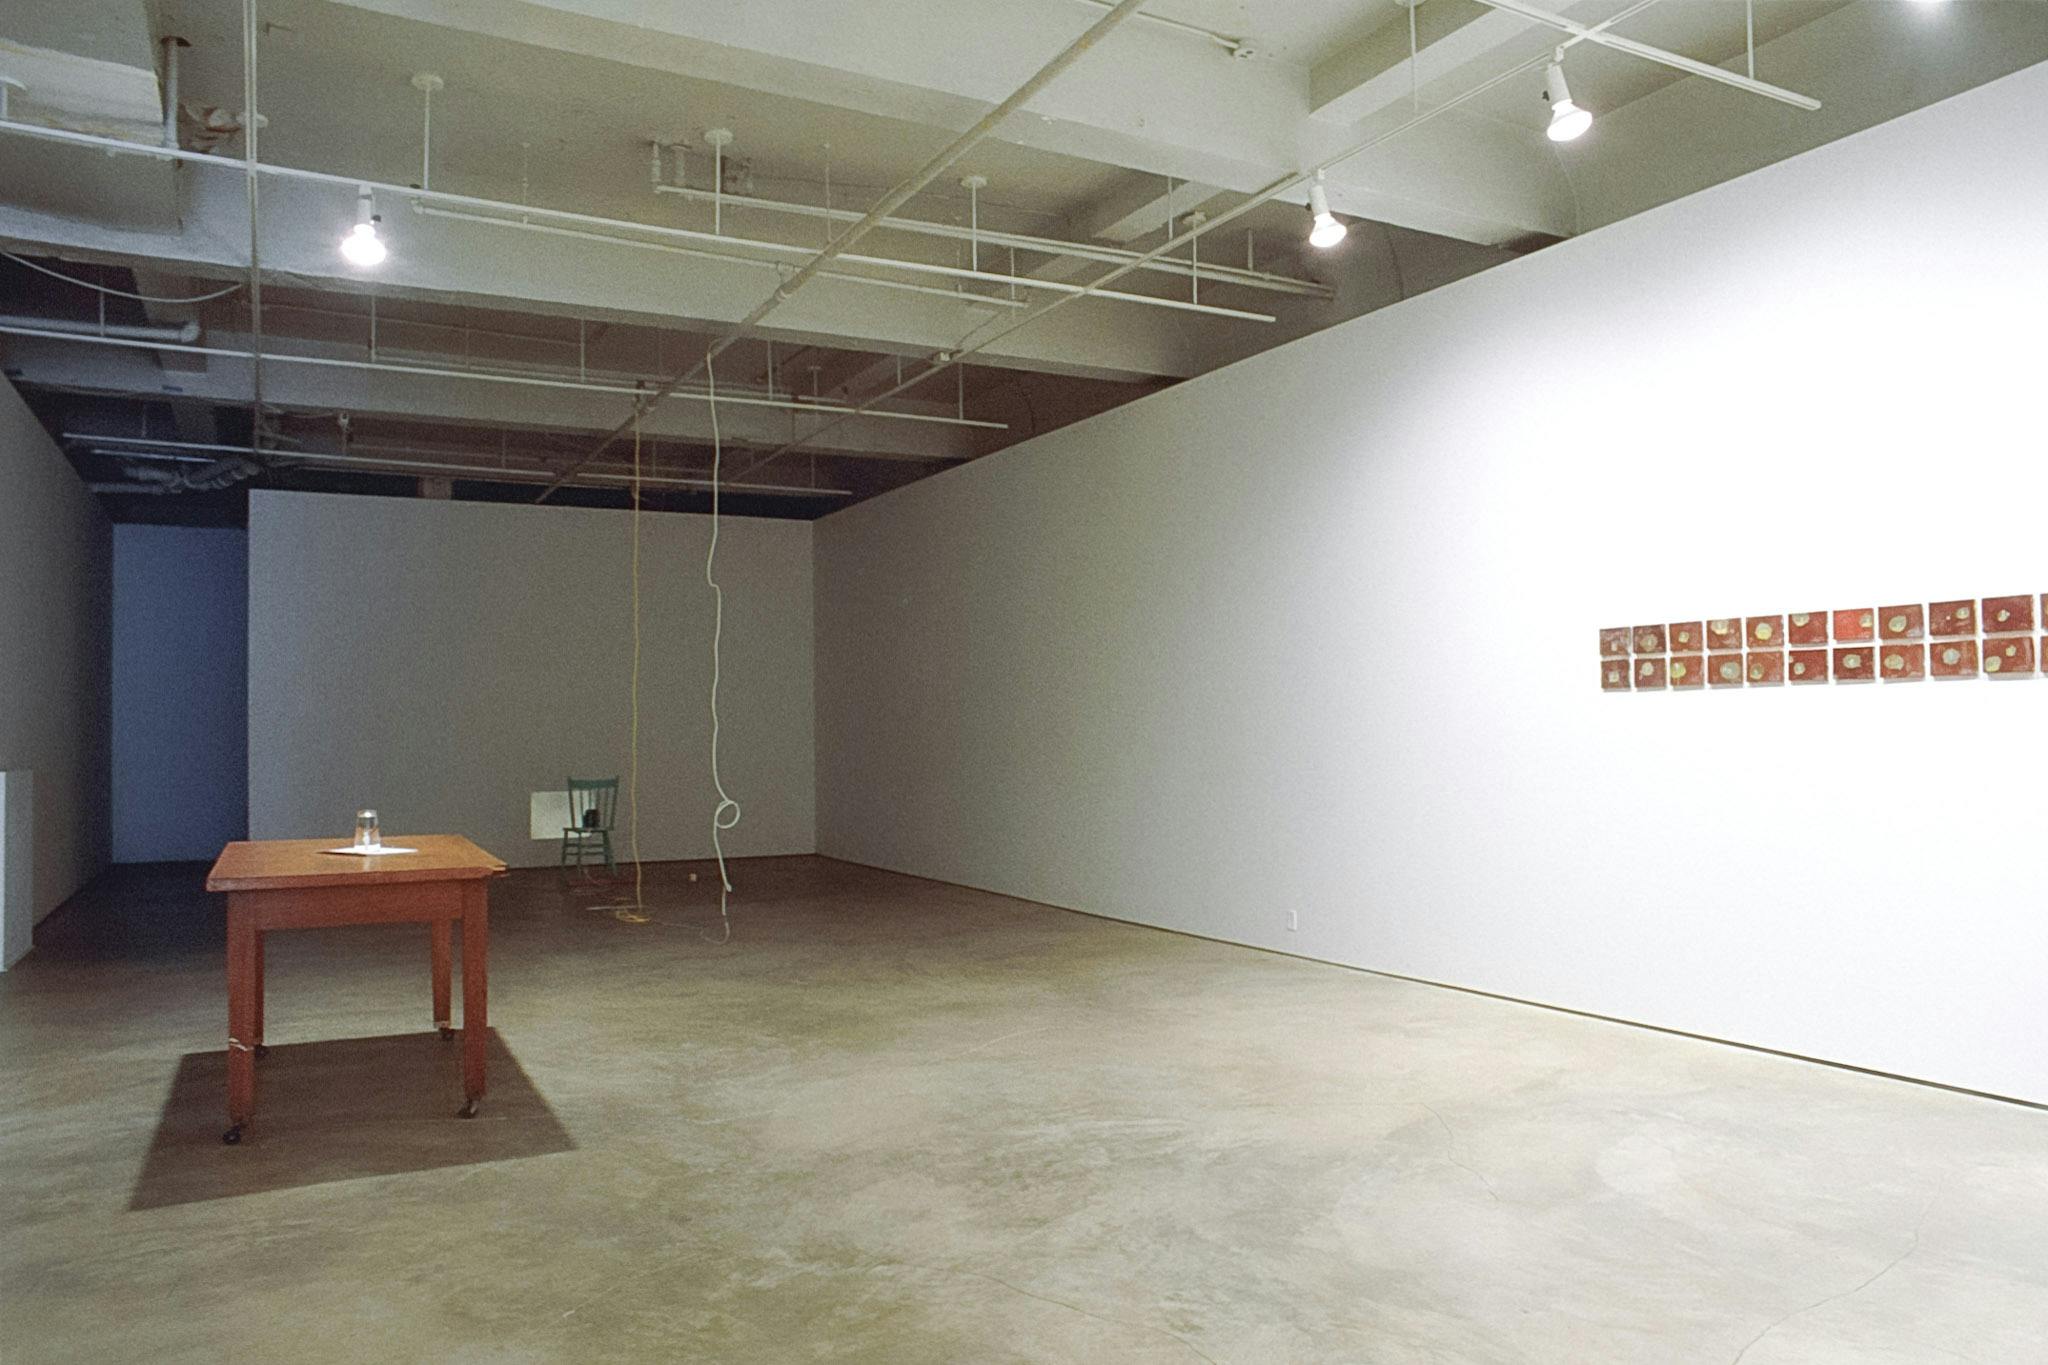 A wooden desk and small wall tiles are installed in the front space of the gallery. in the back, white and yellow strings are hanging from the ceiling in front of a painted wooden chair on the floor. 